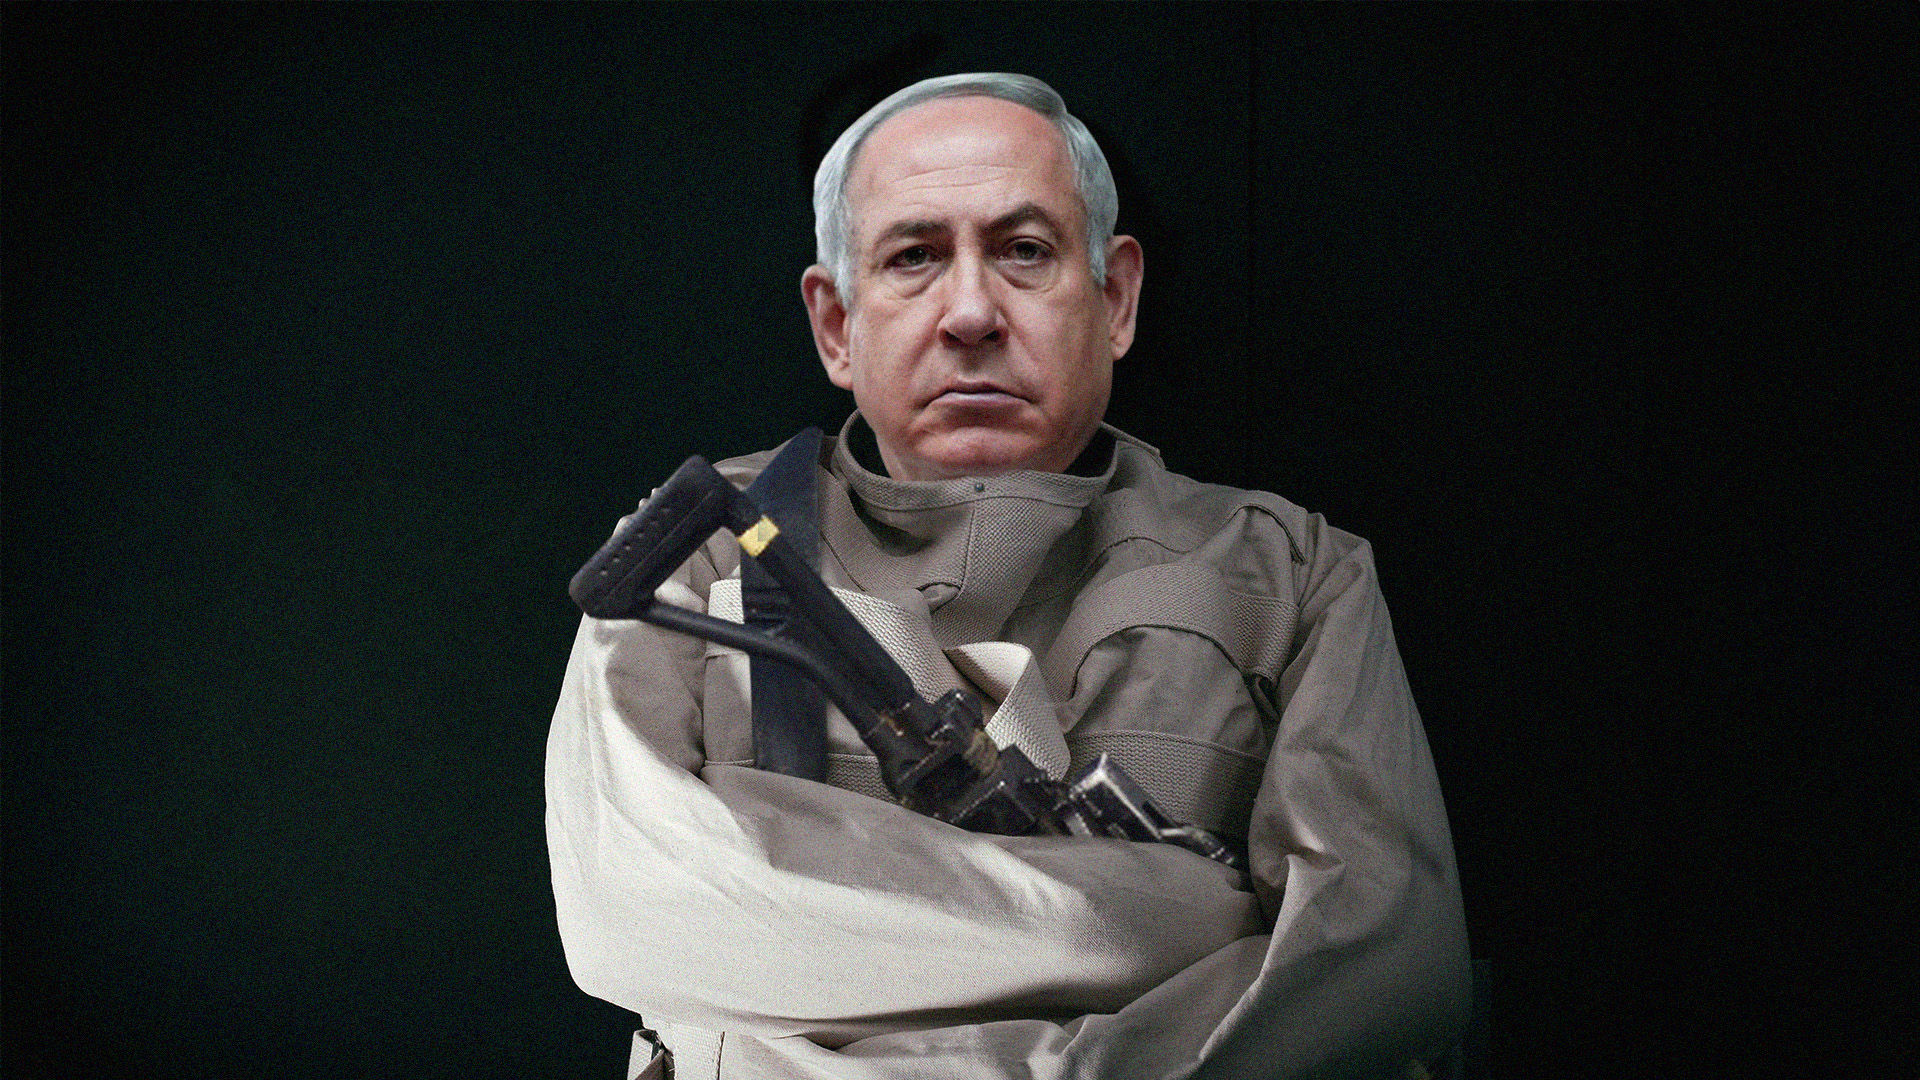 Exclusive: Netanyahu’s Consistent Denials Viewed as Possible Medical Condition image